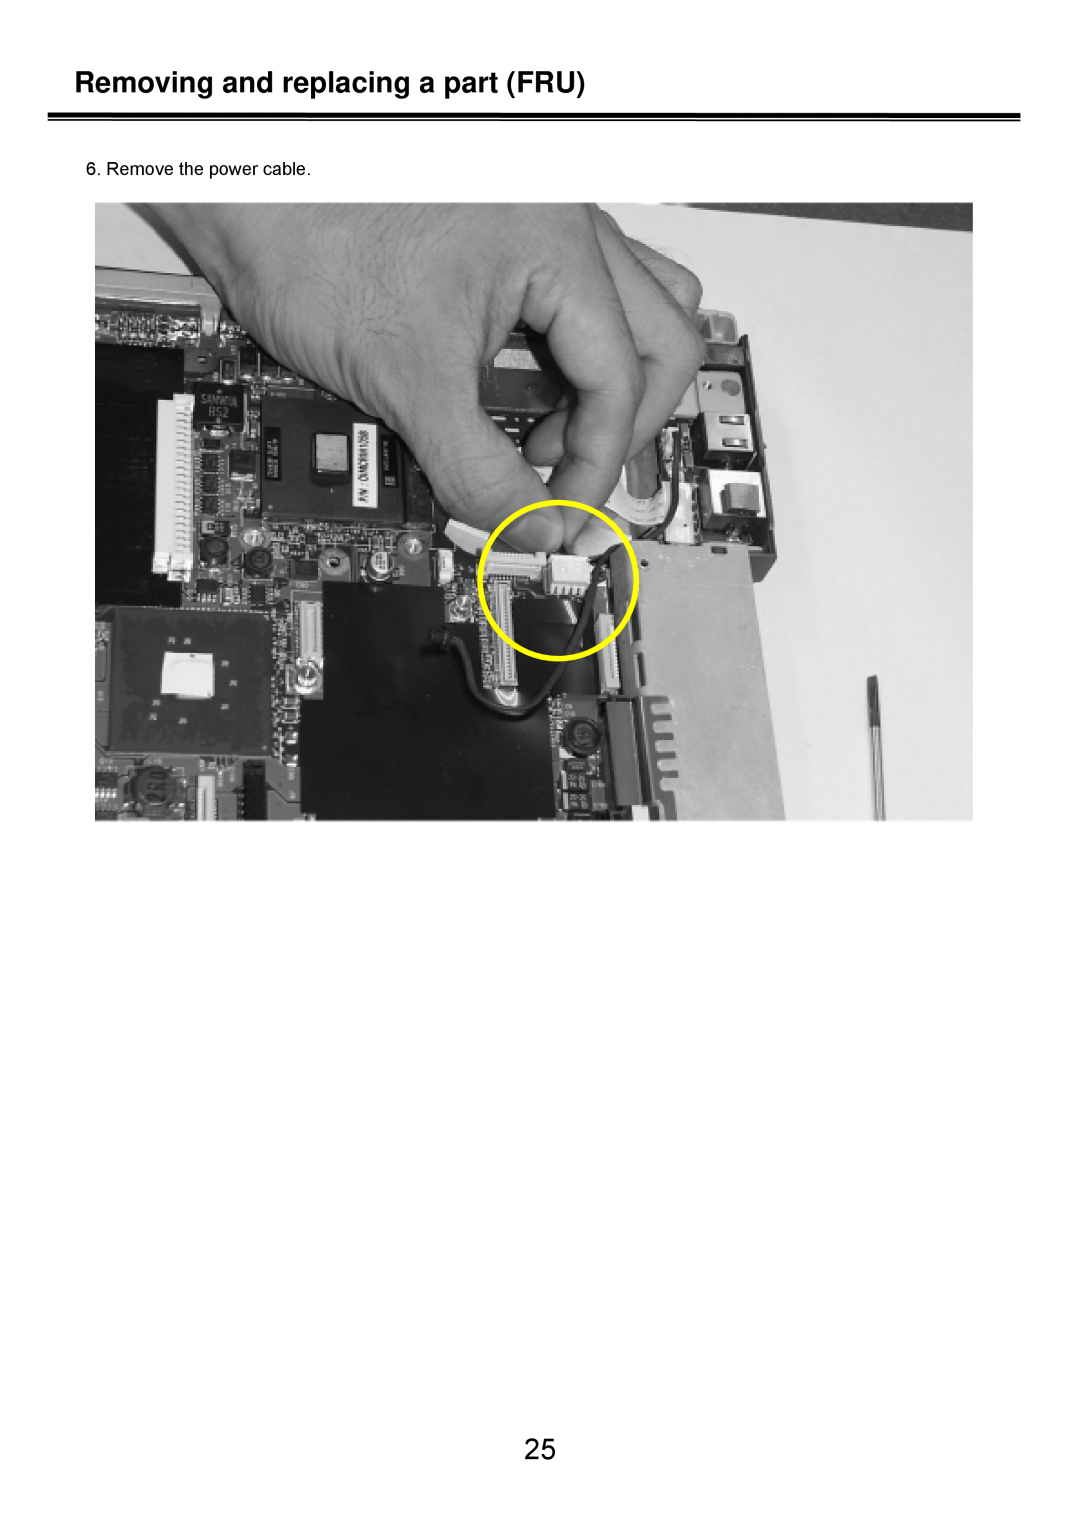 LG Electronics LS50 service manual Remove the power cable, Removing and replacing a part FRU 